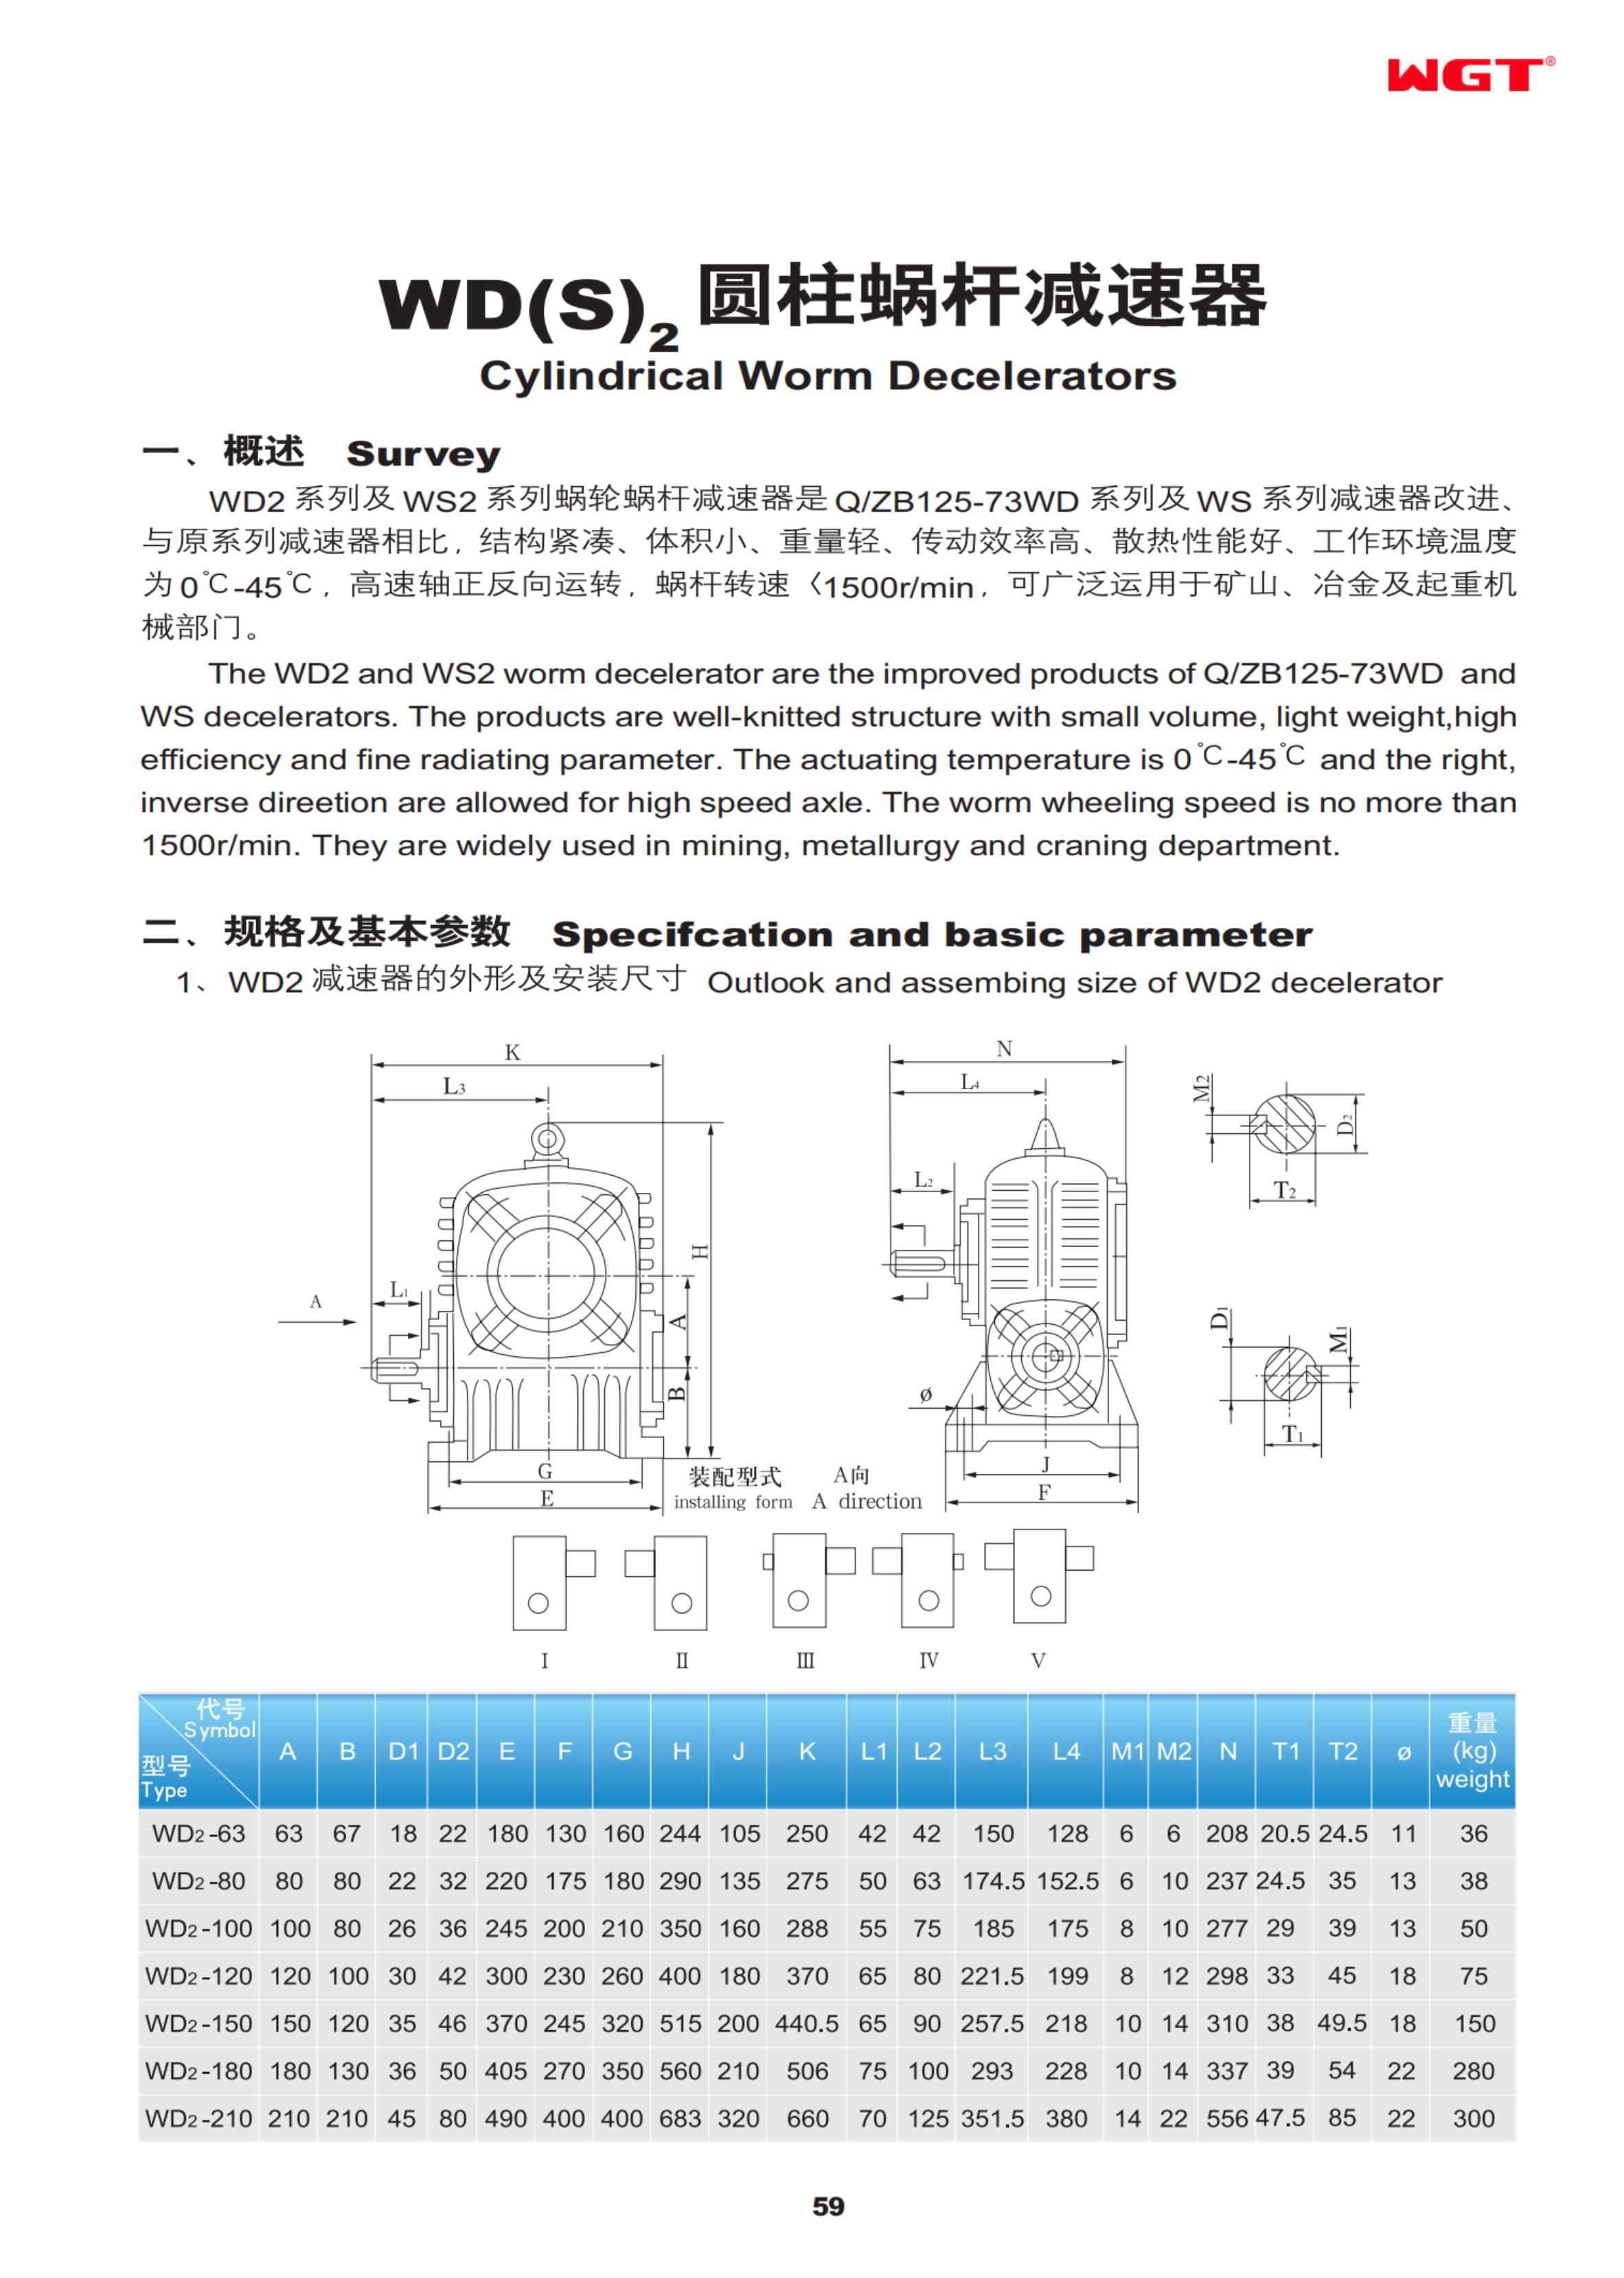 WD2-100 cylindrical worm reducer WGT